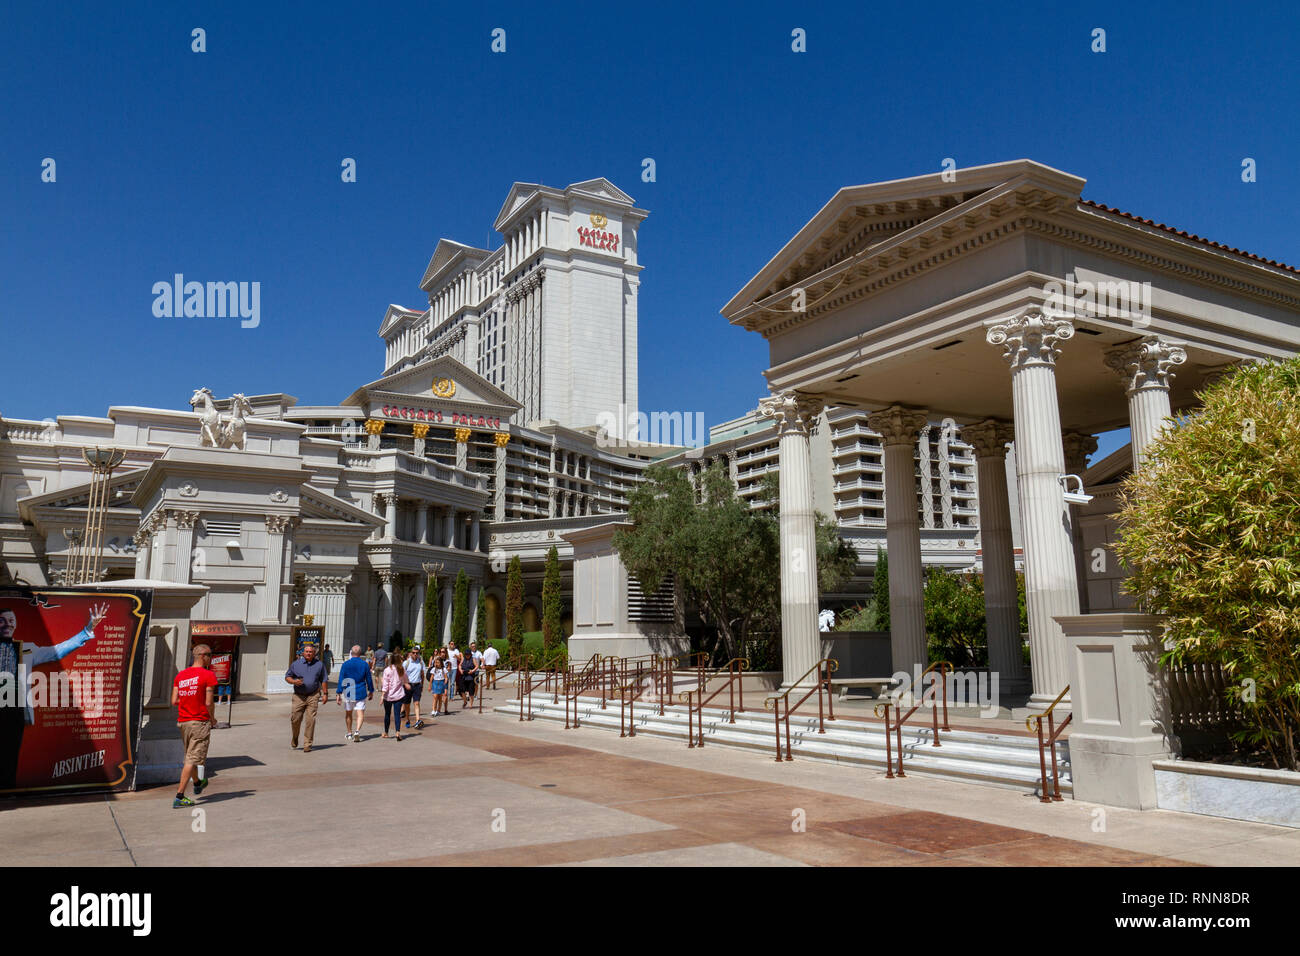 The entrance to Caesars Palace Hotel and casino on The Strip, Las Vegas, Nevada, United States. Stock Photo